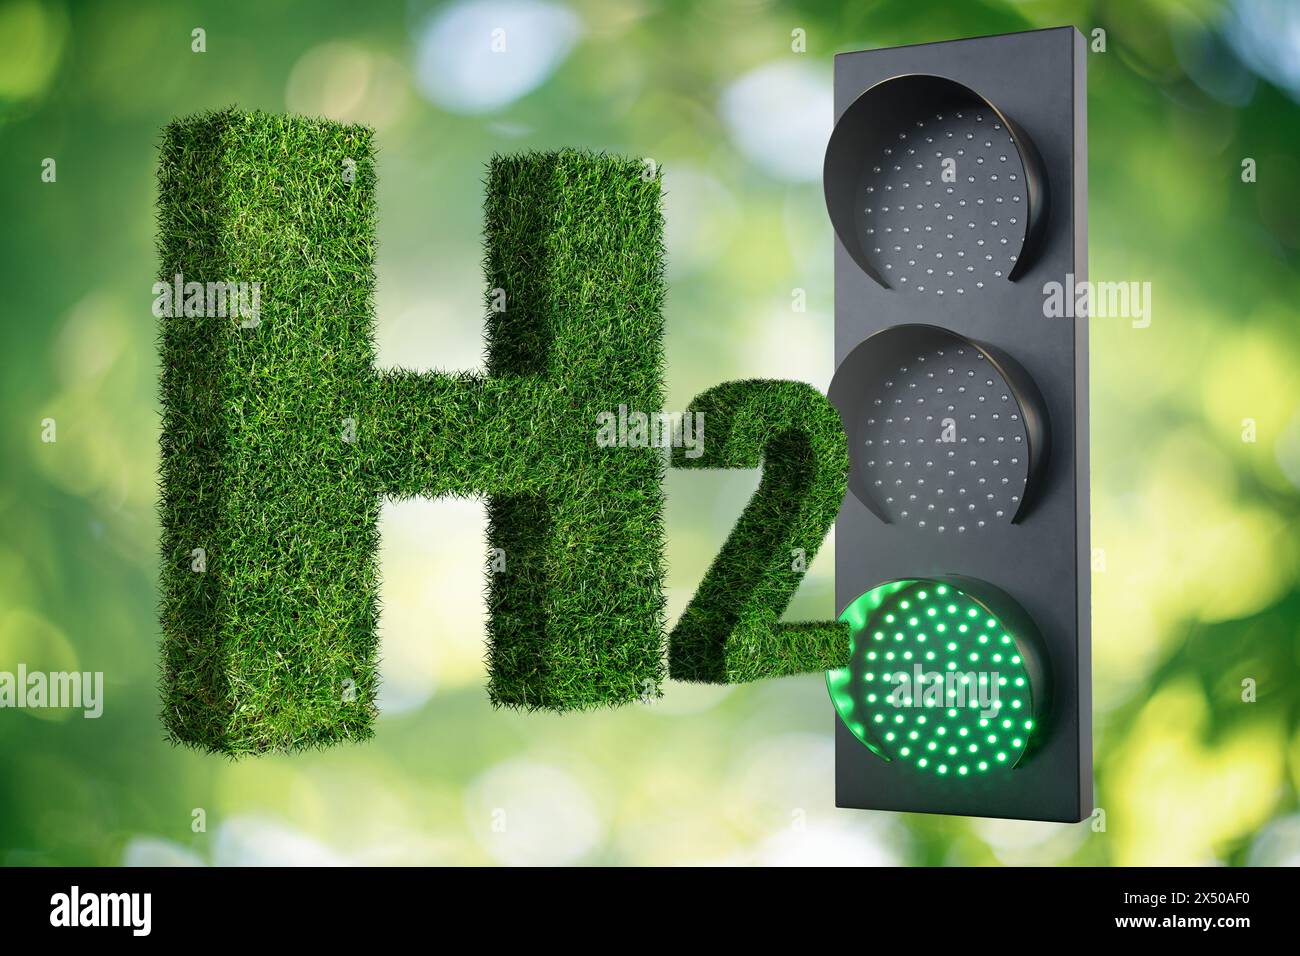 Getting green hydrogen from renewable energy sources. Concept. Stock Photo